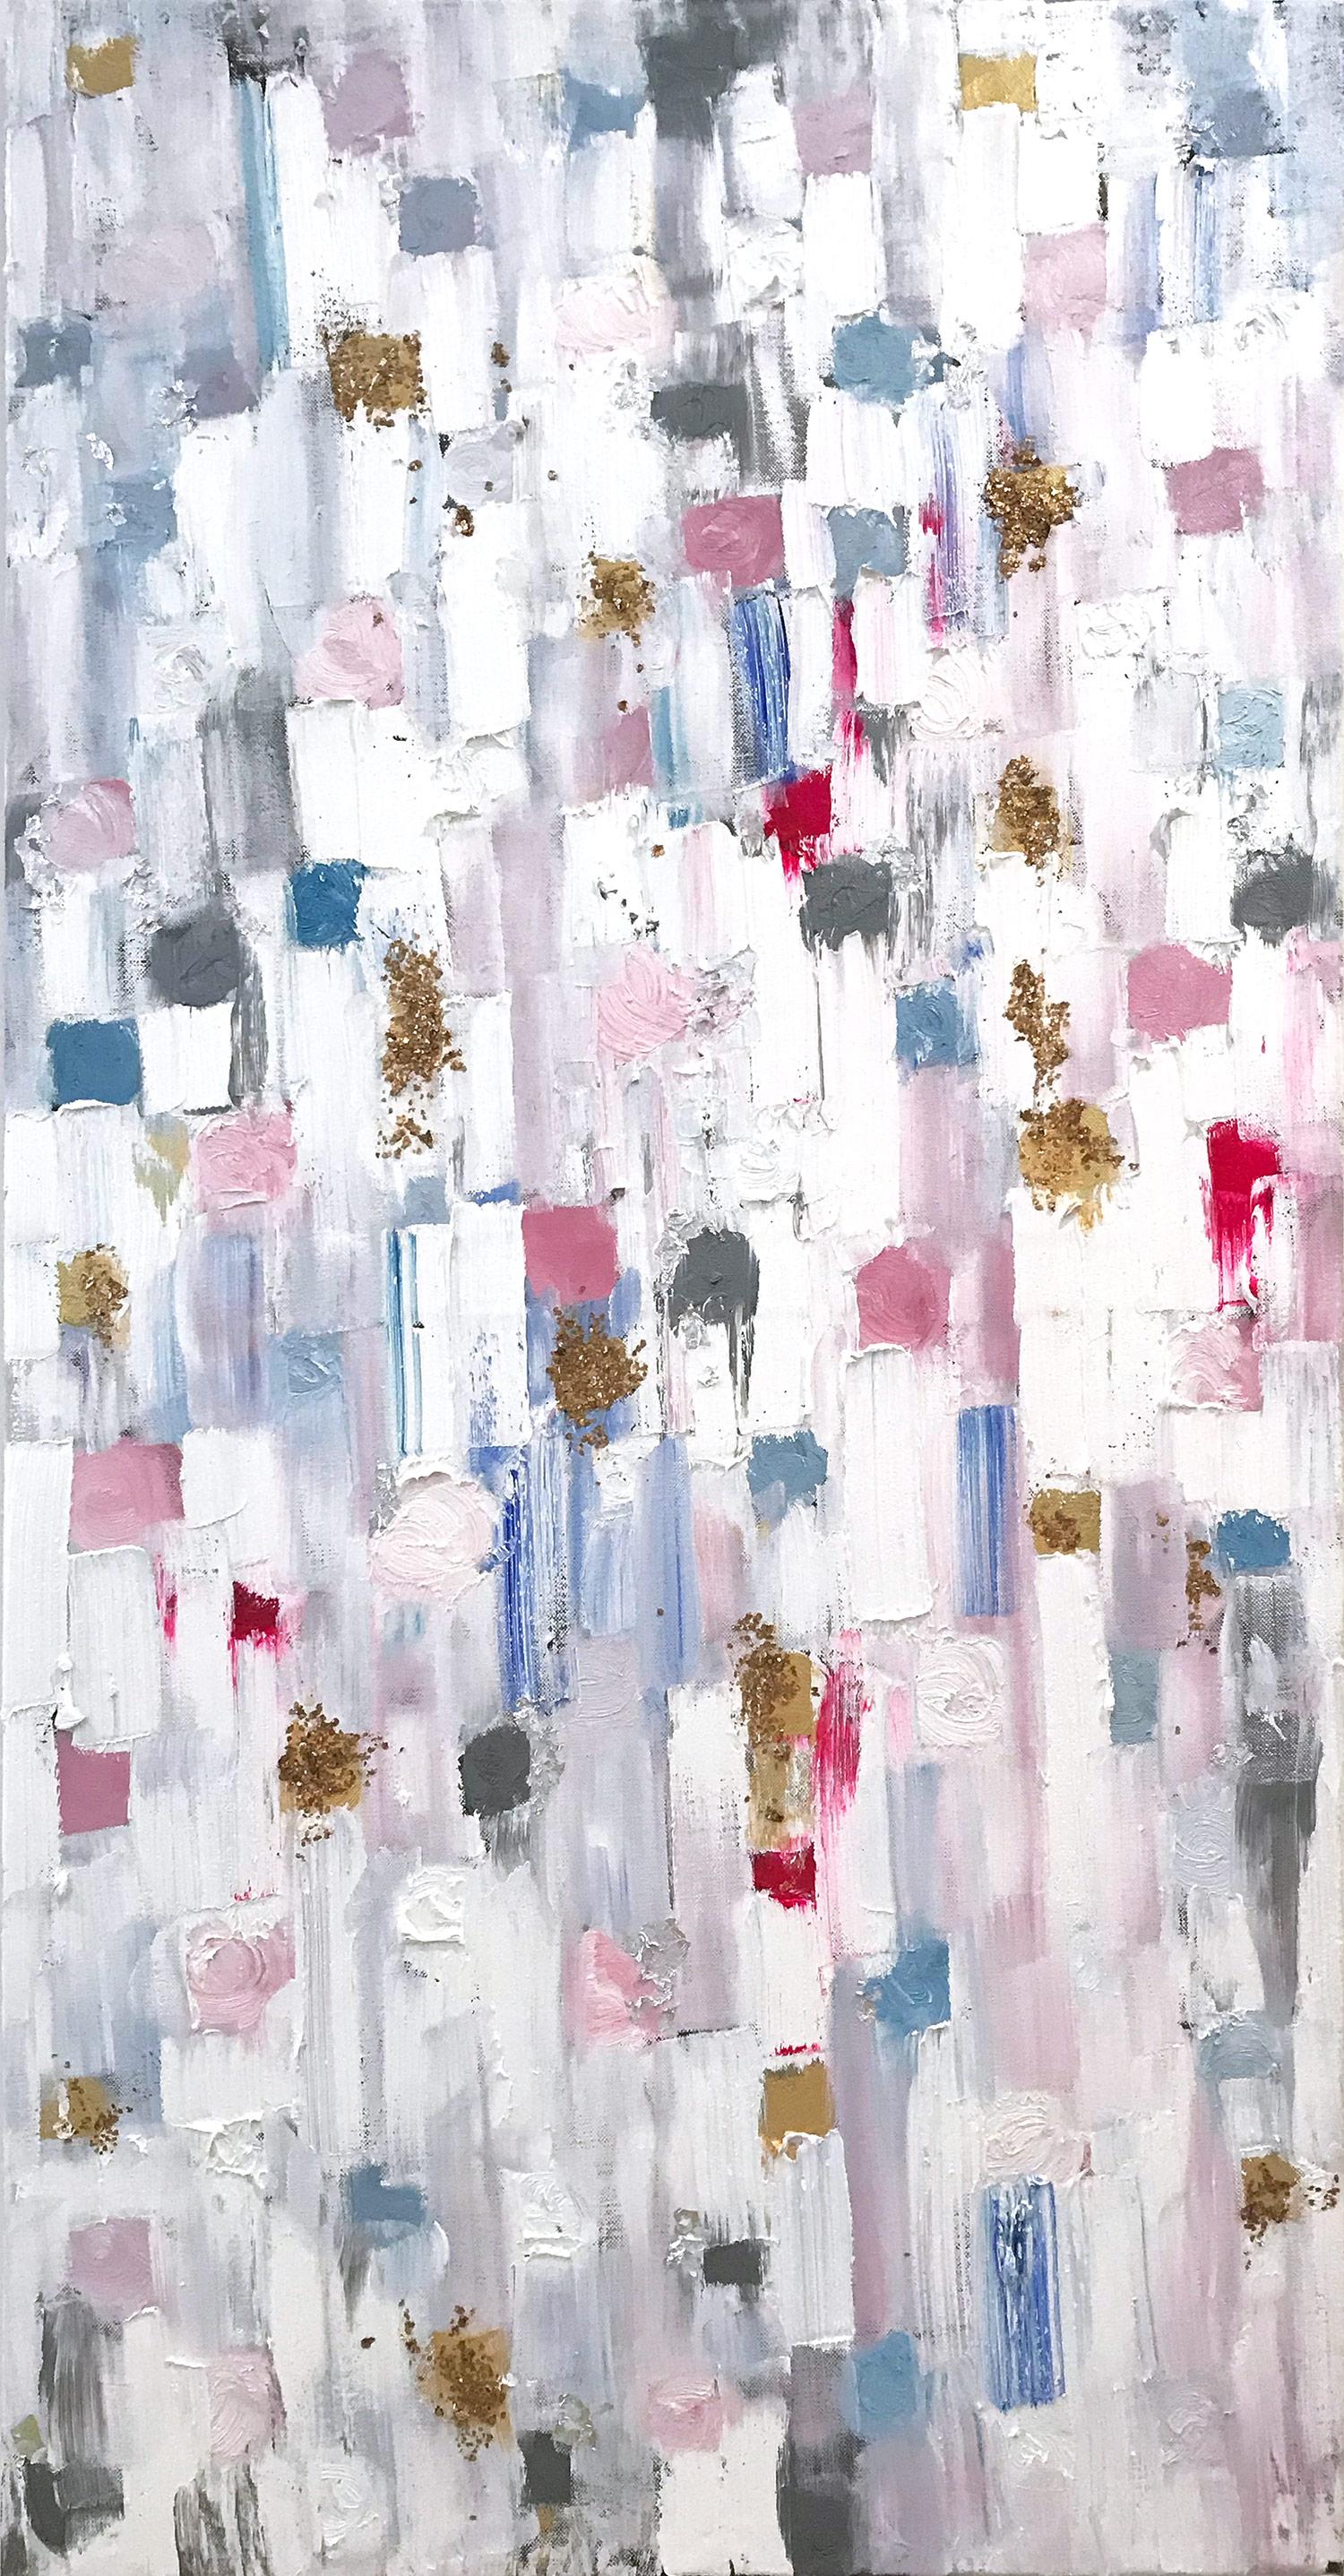 Abstract Painting Cindy Shaoul - "Dripping Dots - Hollywood" - Peinture à l'huile abstraite colorée sur toile 